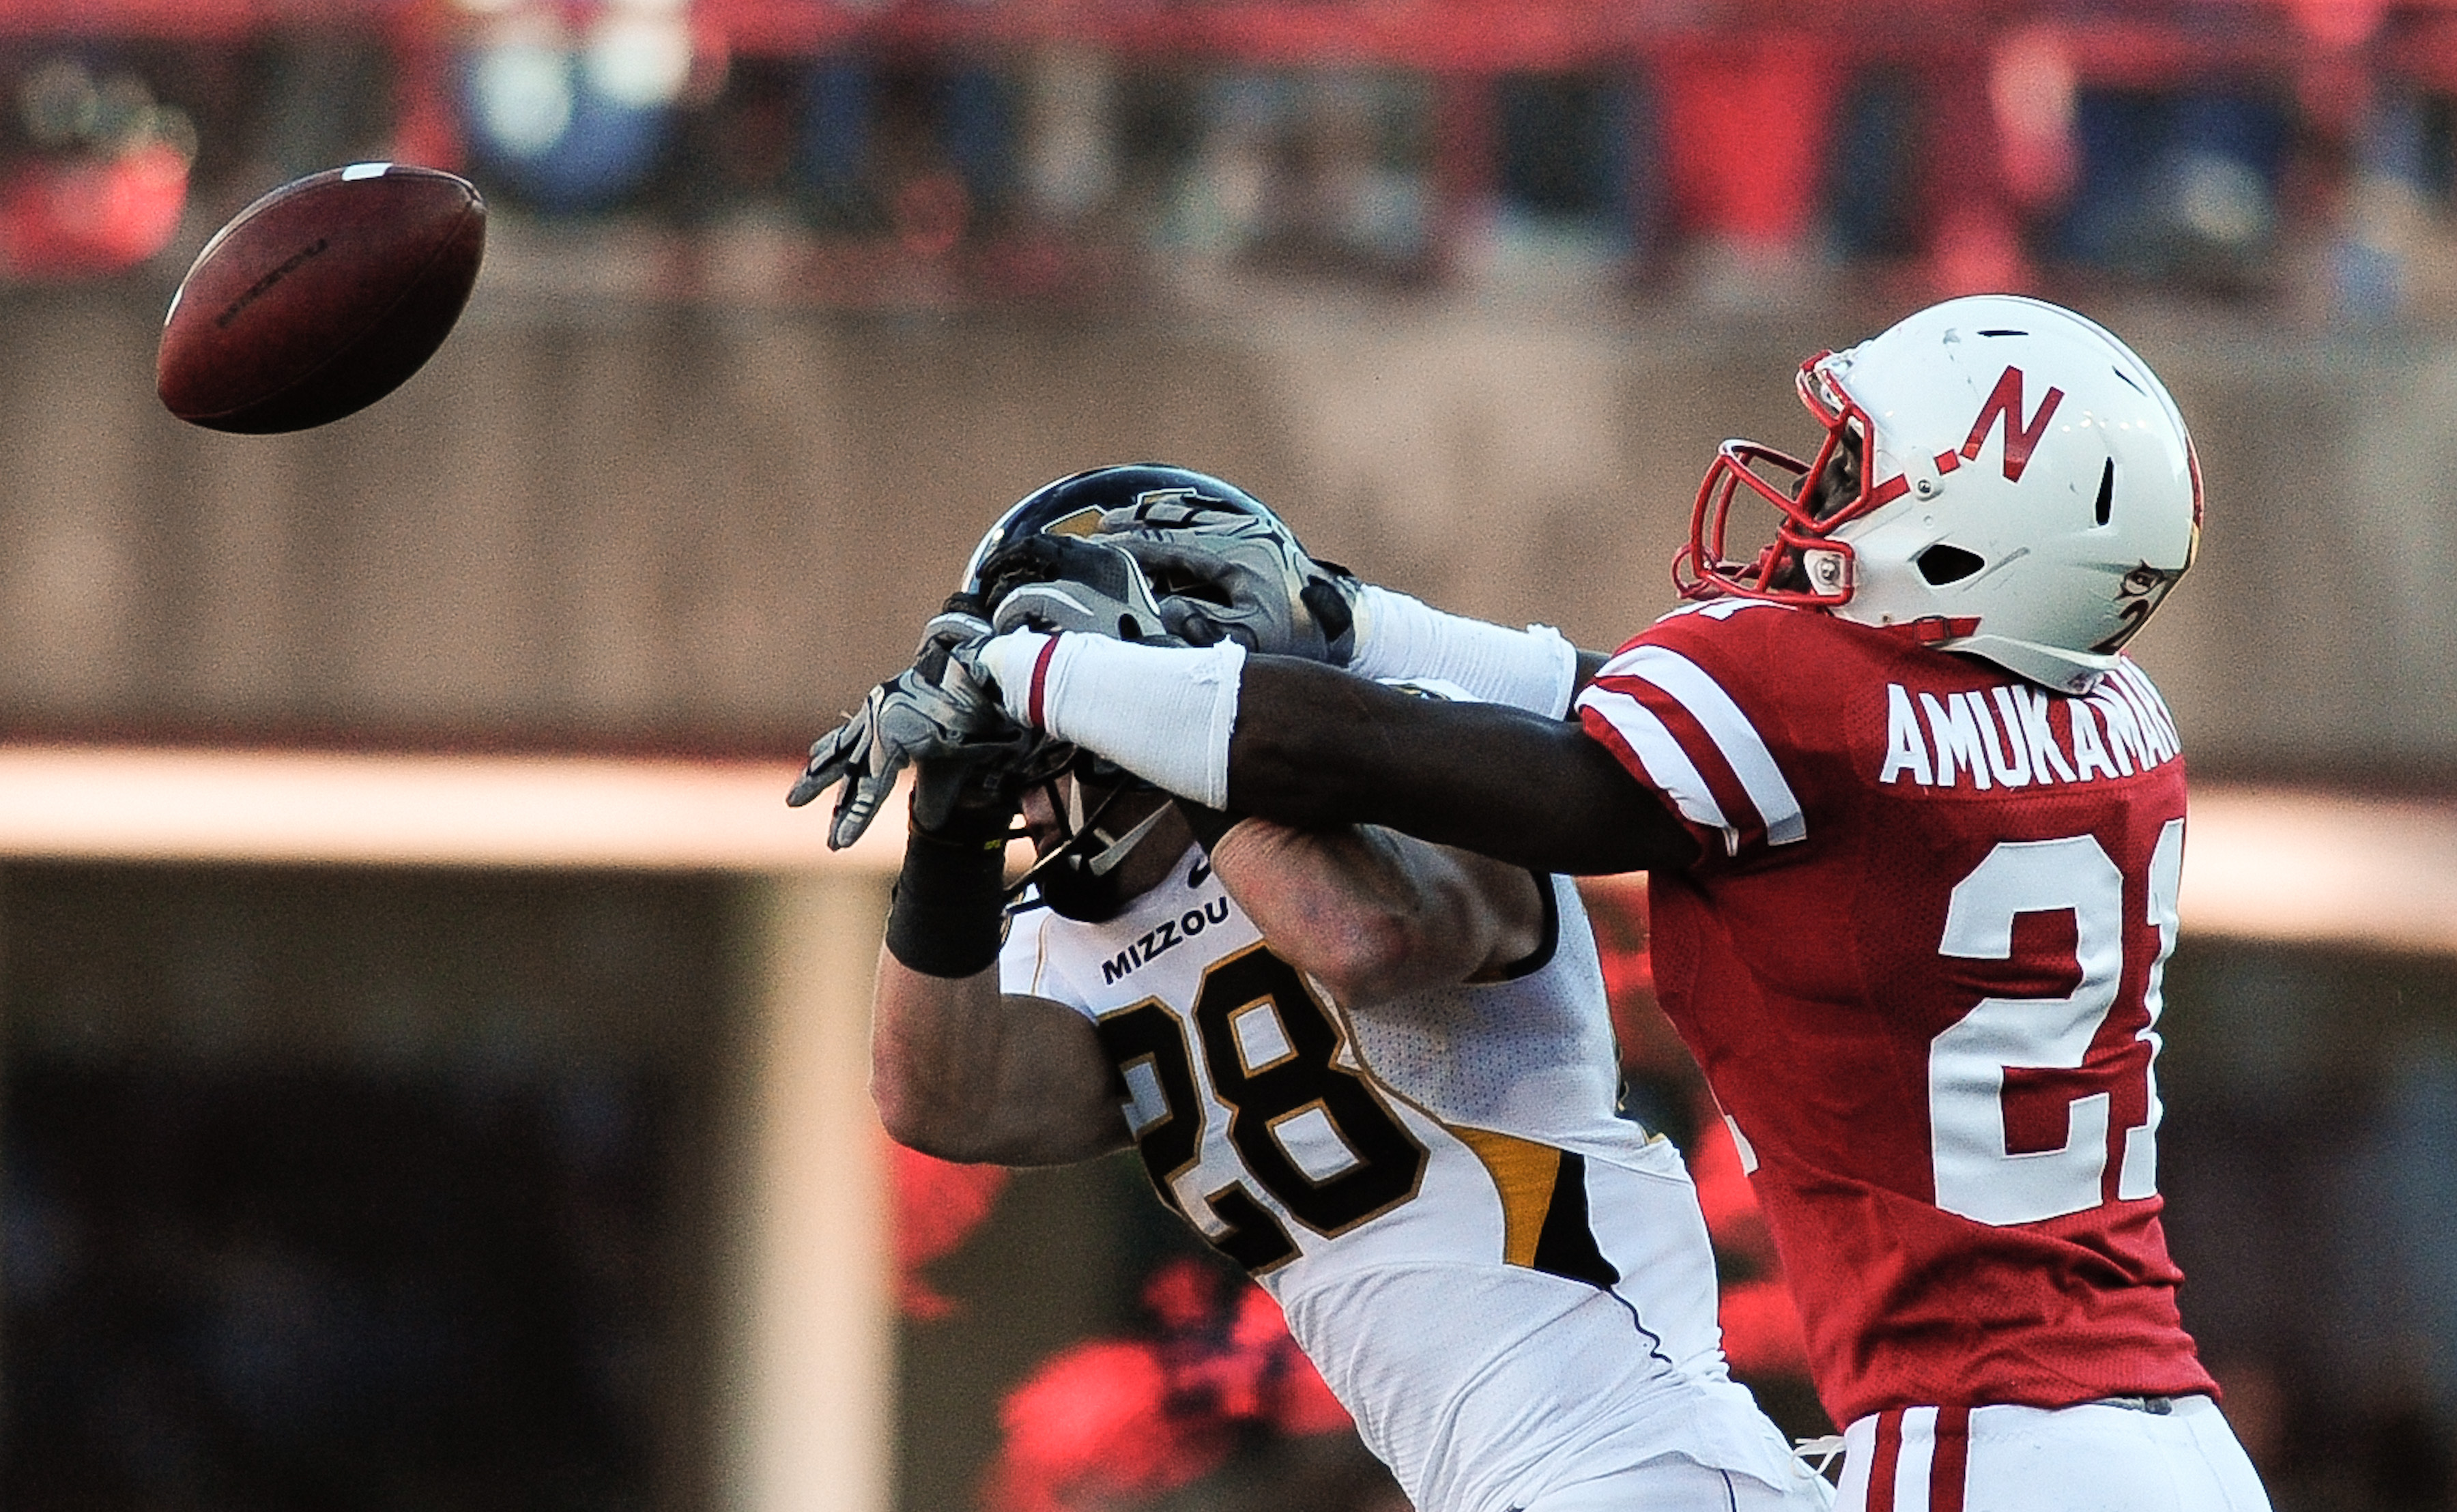 LINCOLN, NE - OCTOBER 30: Cornerback Prince Amukamara #21 of the Nebraska Cornhuskers breaks up a pass intended for wide receiver T.J. Moe #28 of the Missouri Tigers during first half action of their game at Memorial Stadium on October 30, 2010 in Lincoln